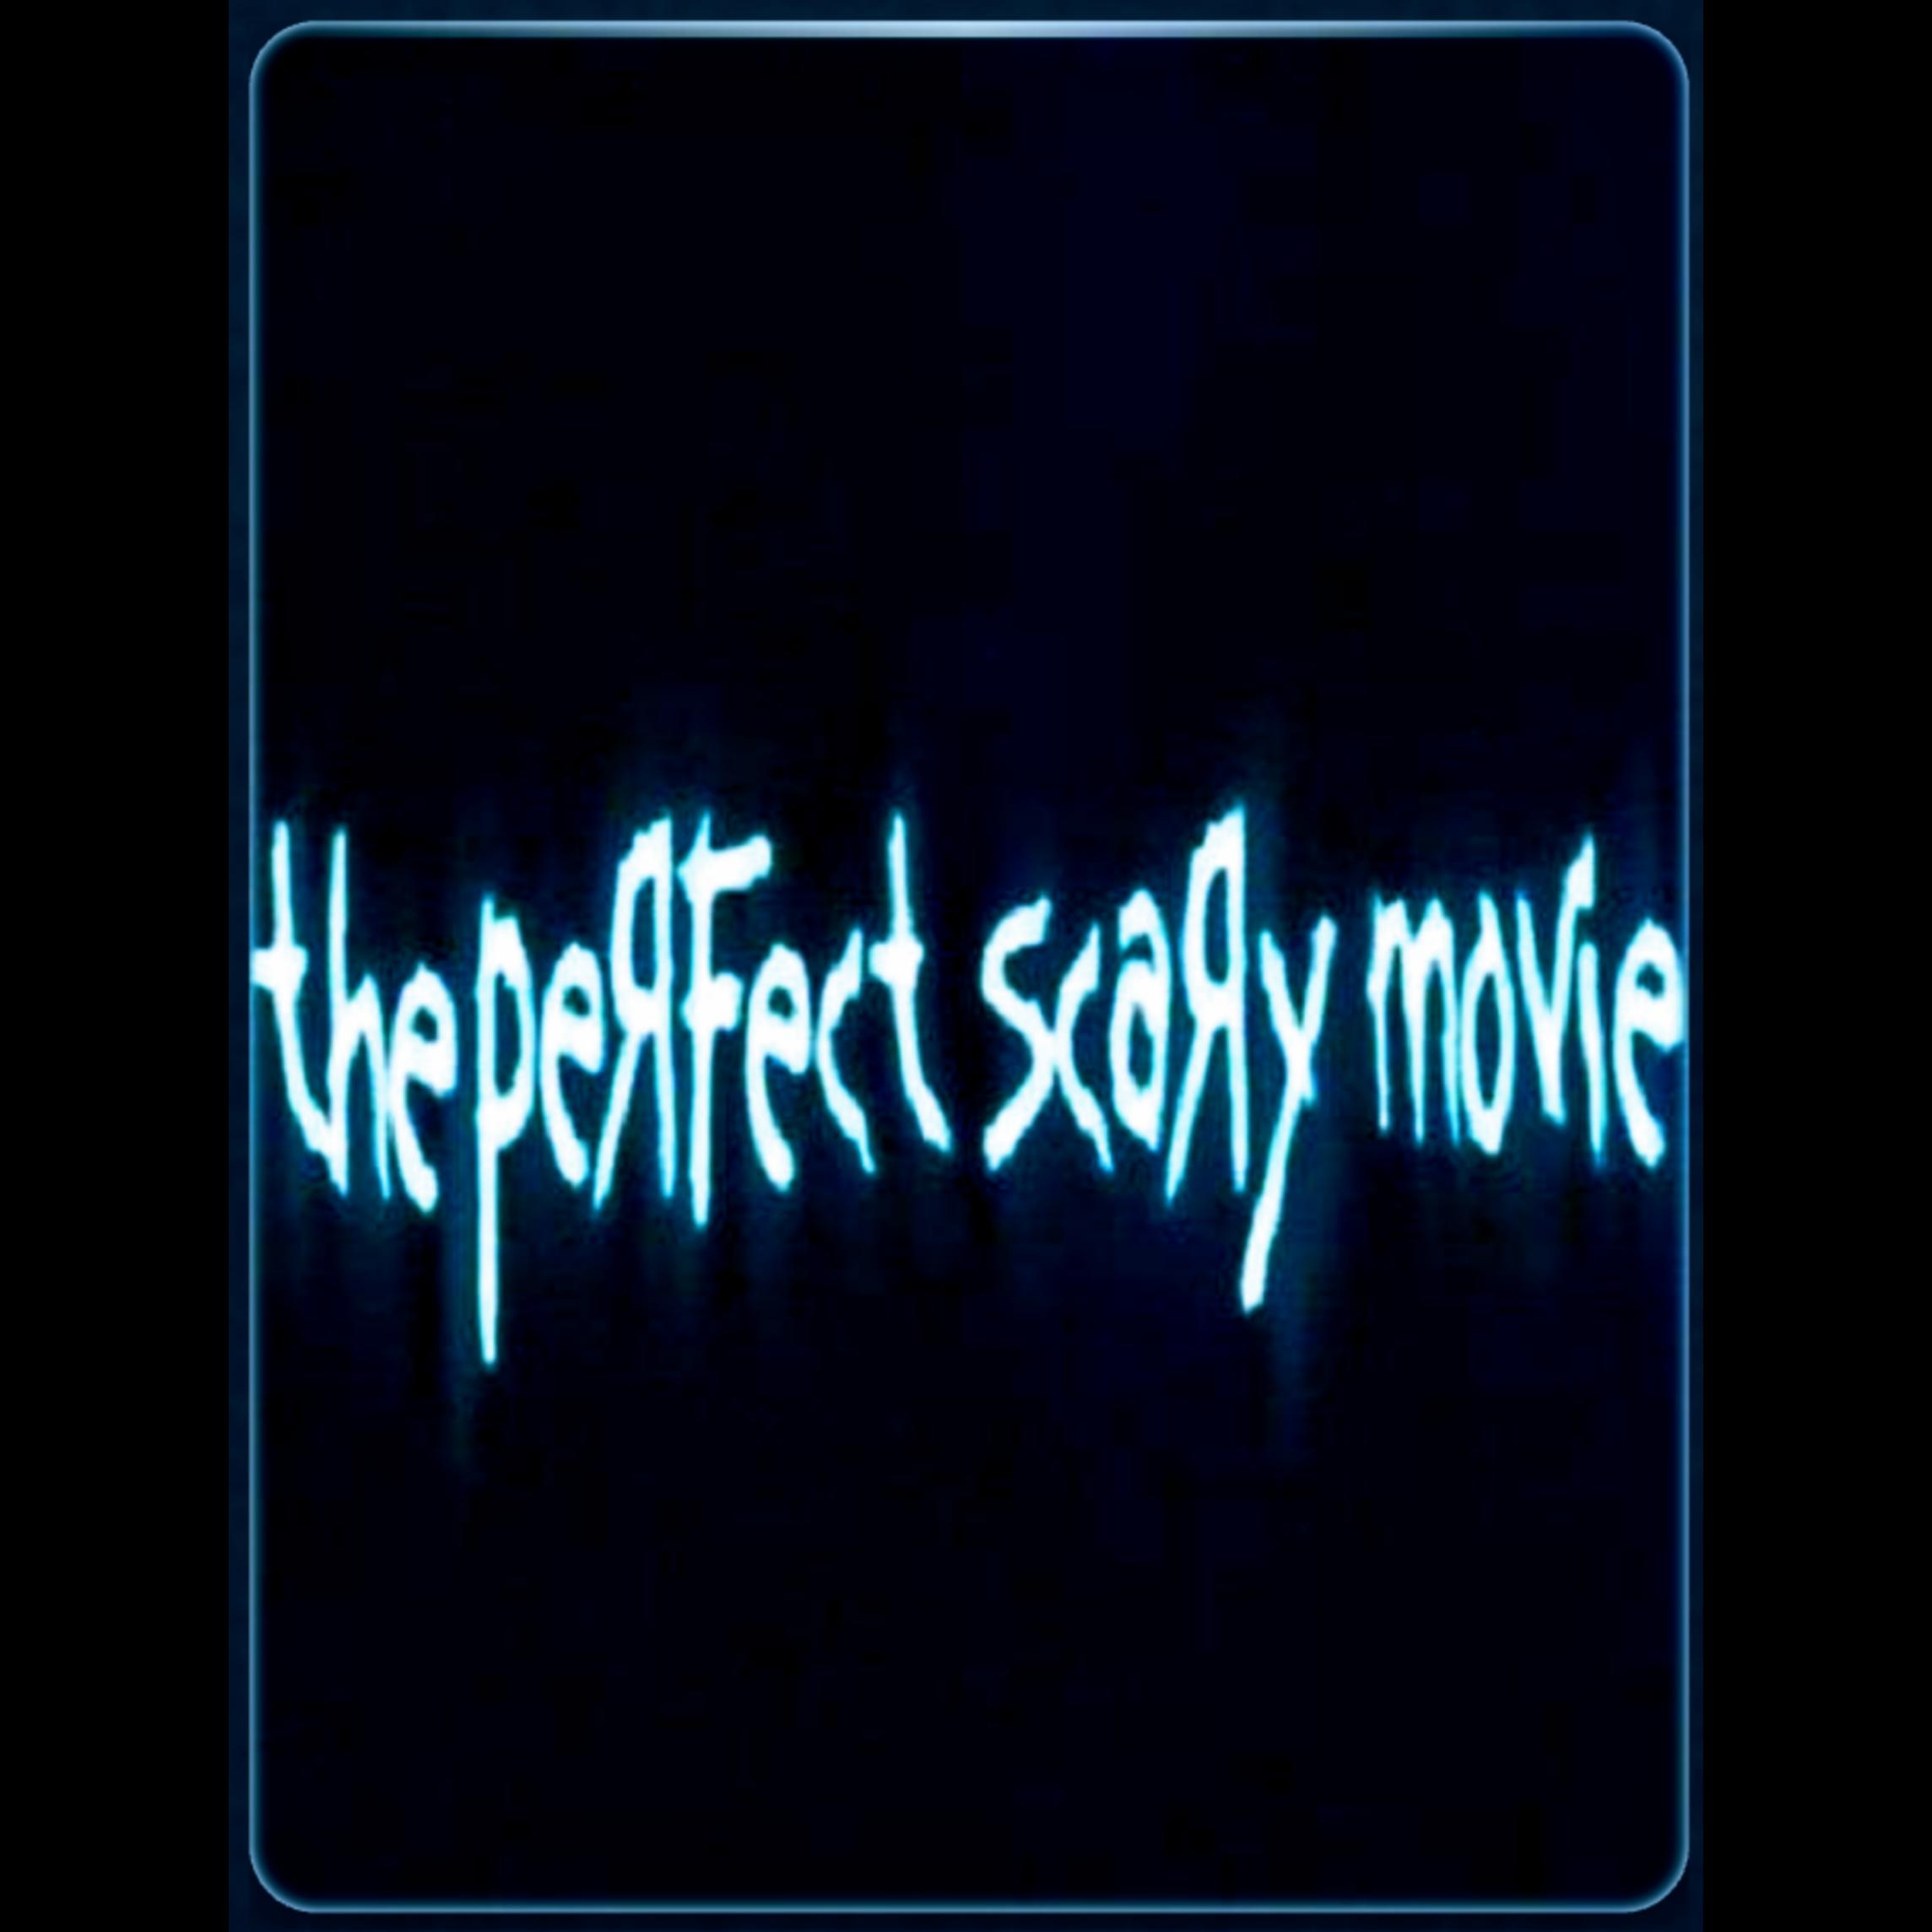 The Perfect Scary Movie (2005) starring Alexander Armstrong on DVD on DVD